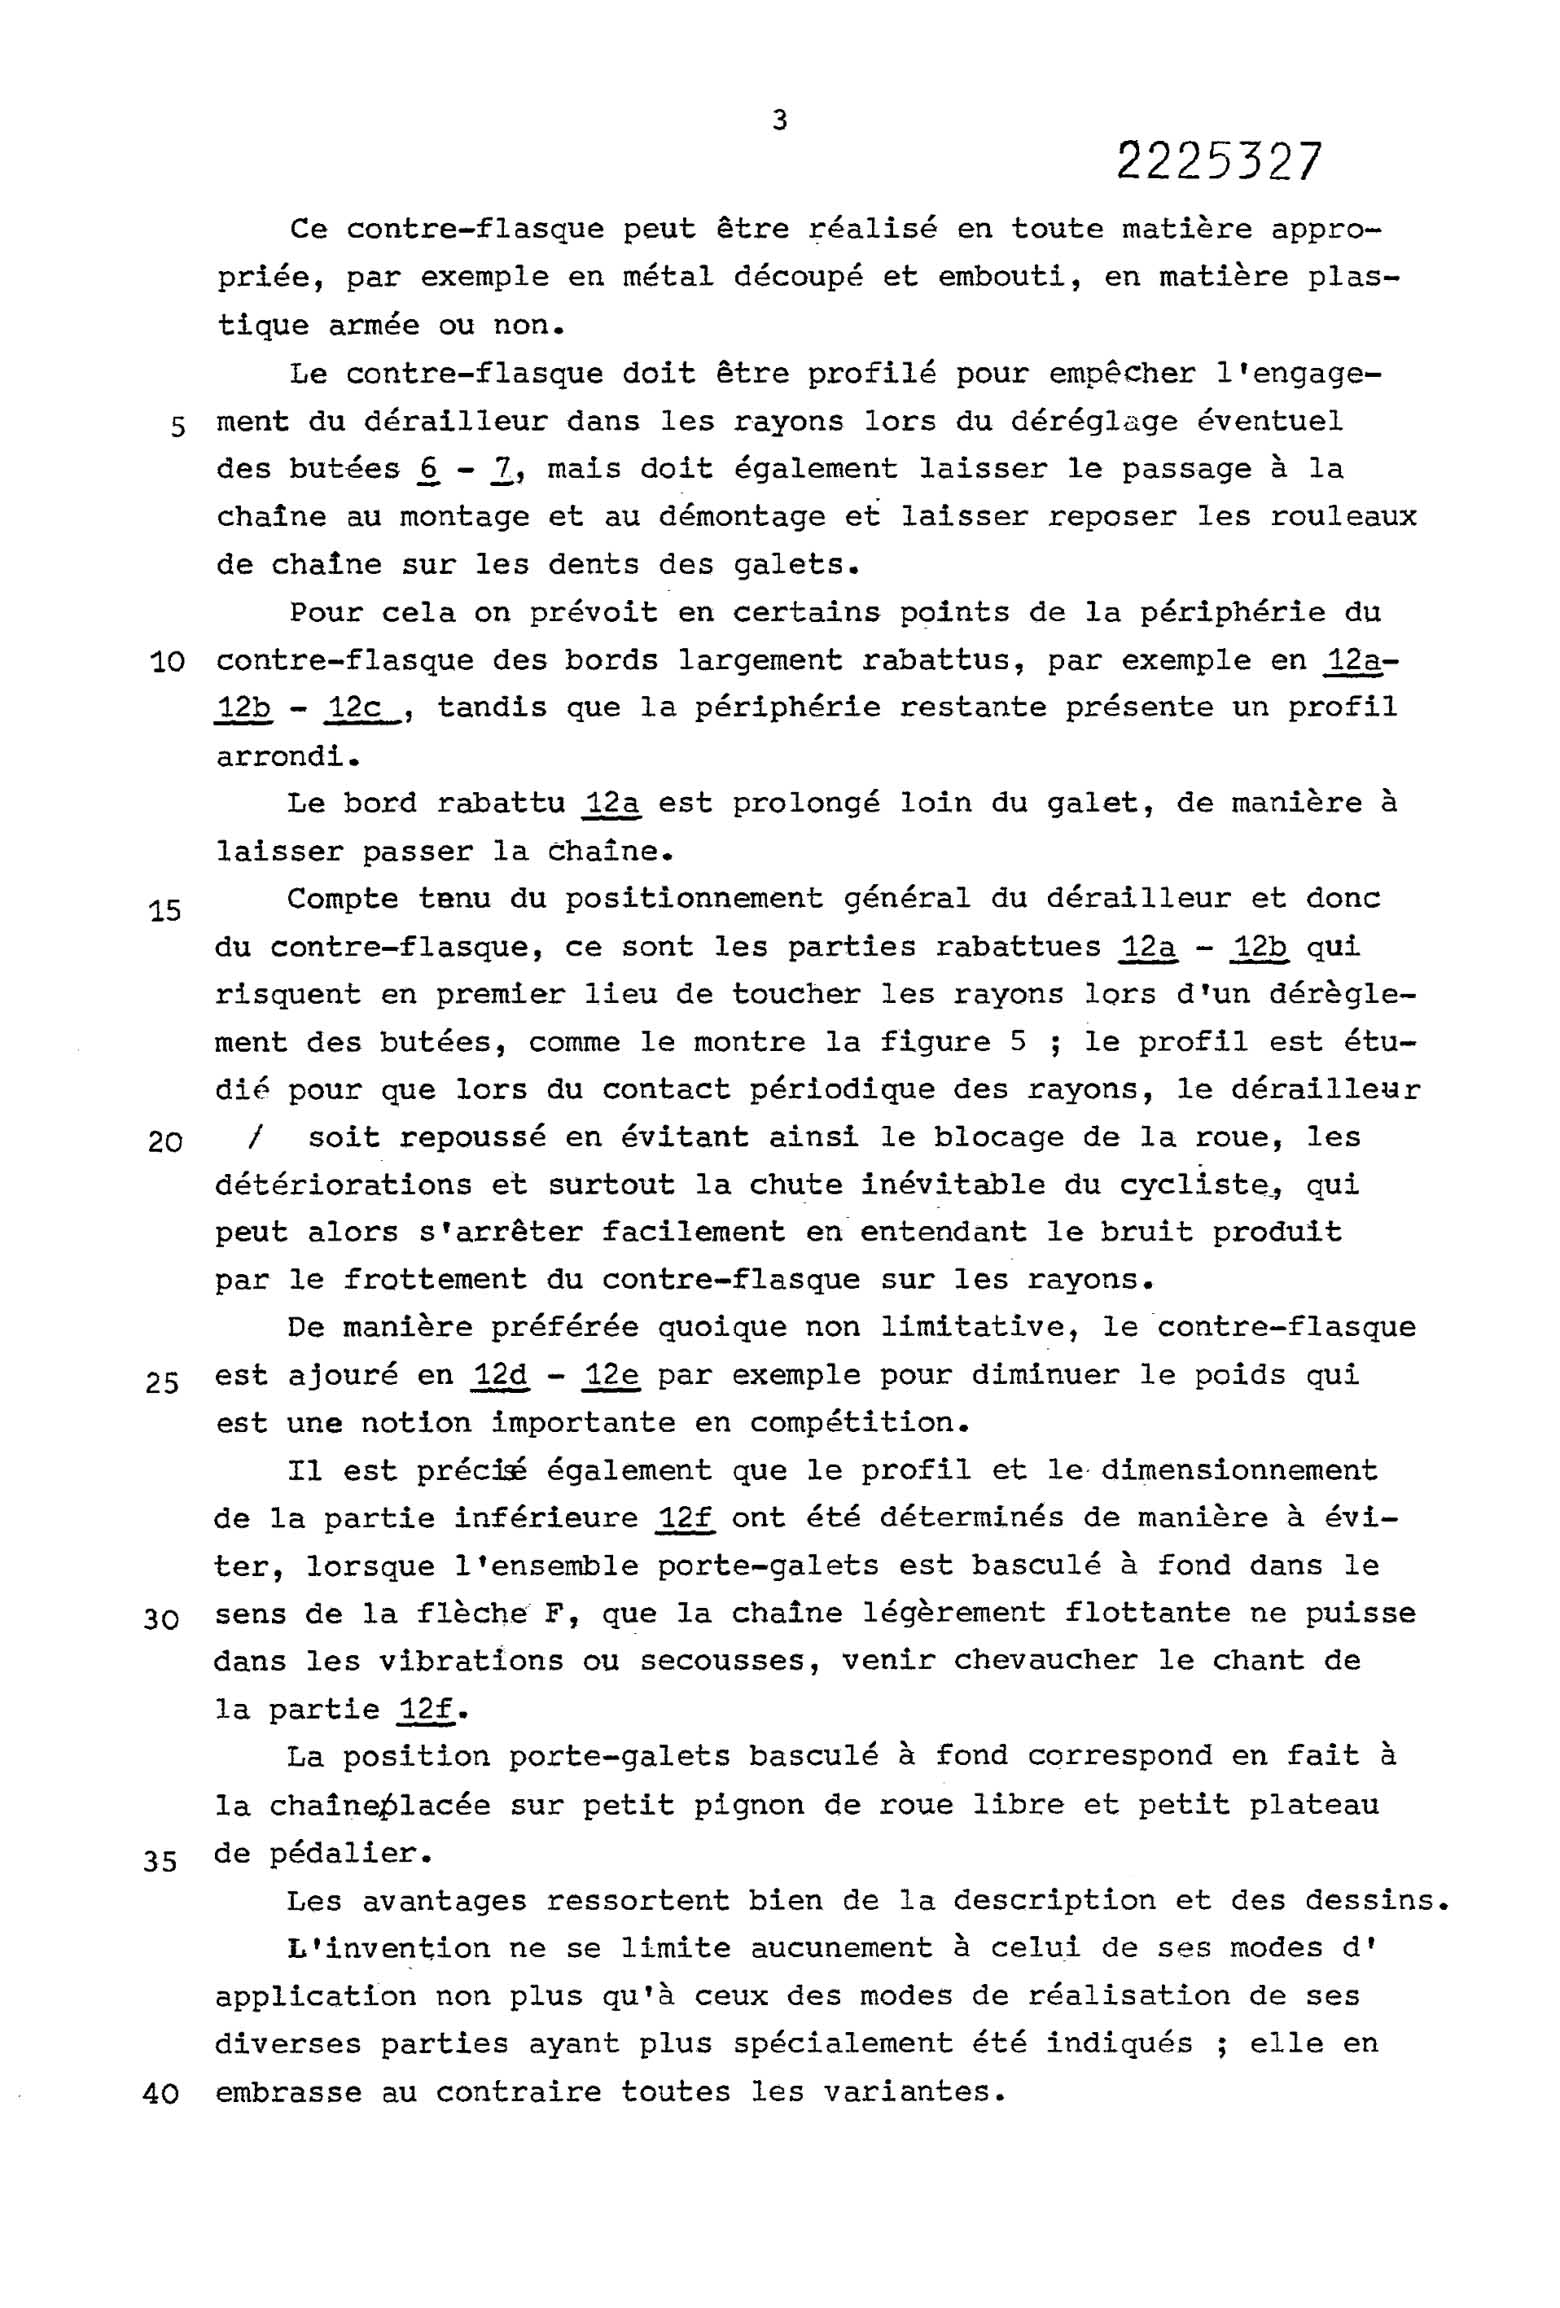 French Patent 2,225,327 - Simplex scan 004 main image